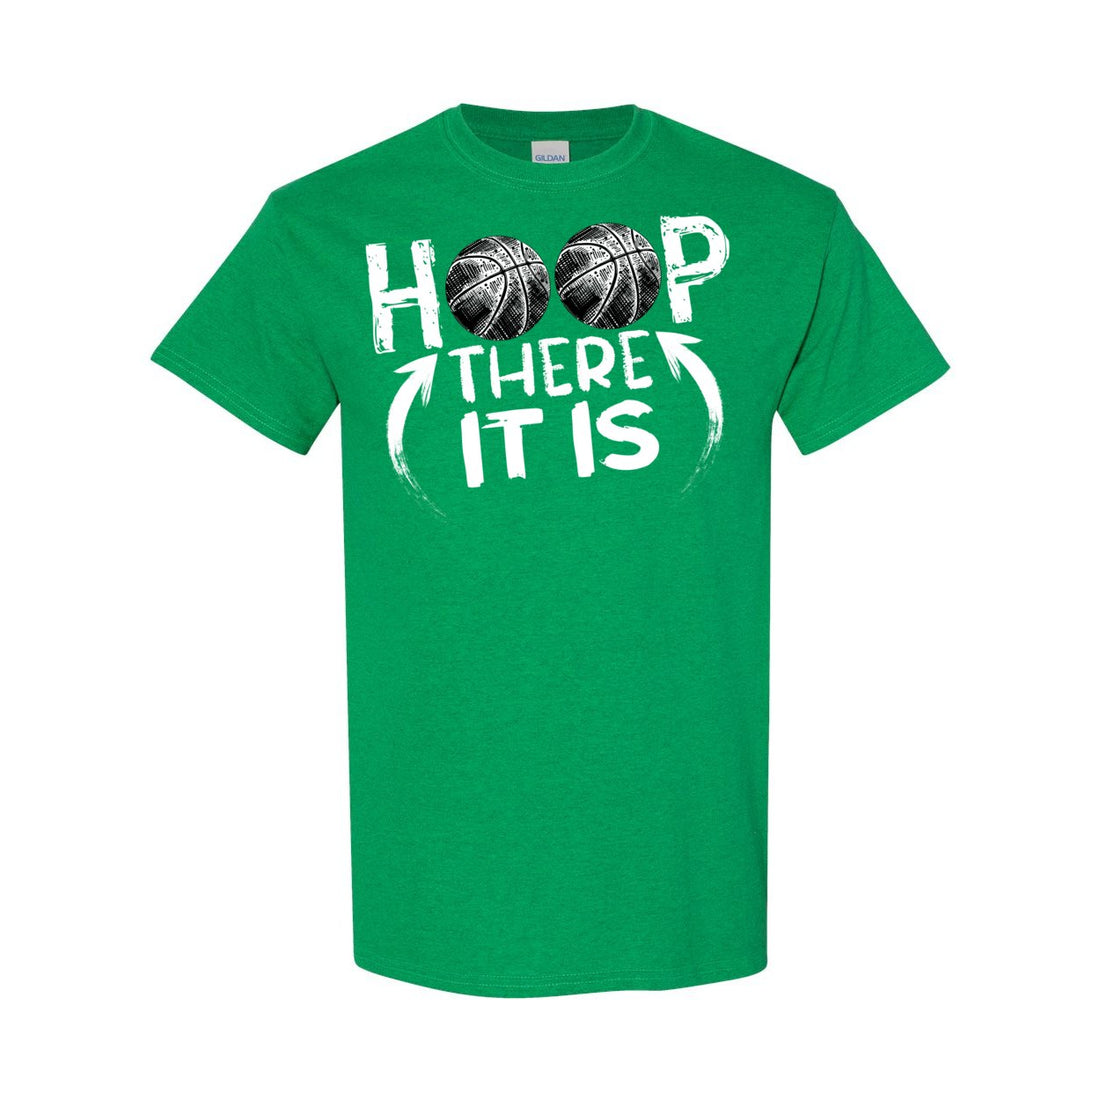 Hoop There It Is Cotton T-Shirt - T-Shirts - Positively Sassy - Hoop There It Is Cotton T-Shirt